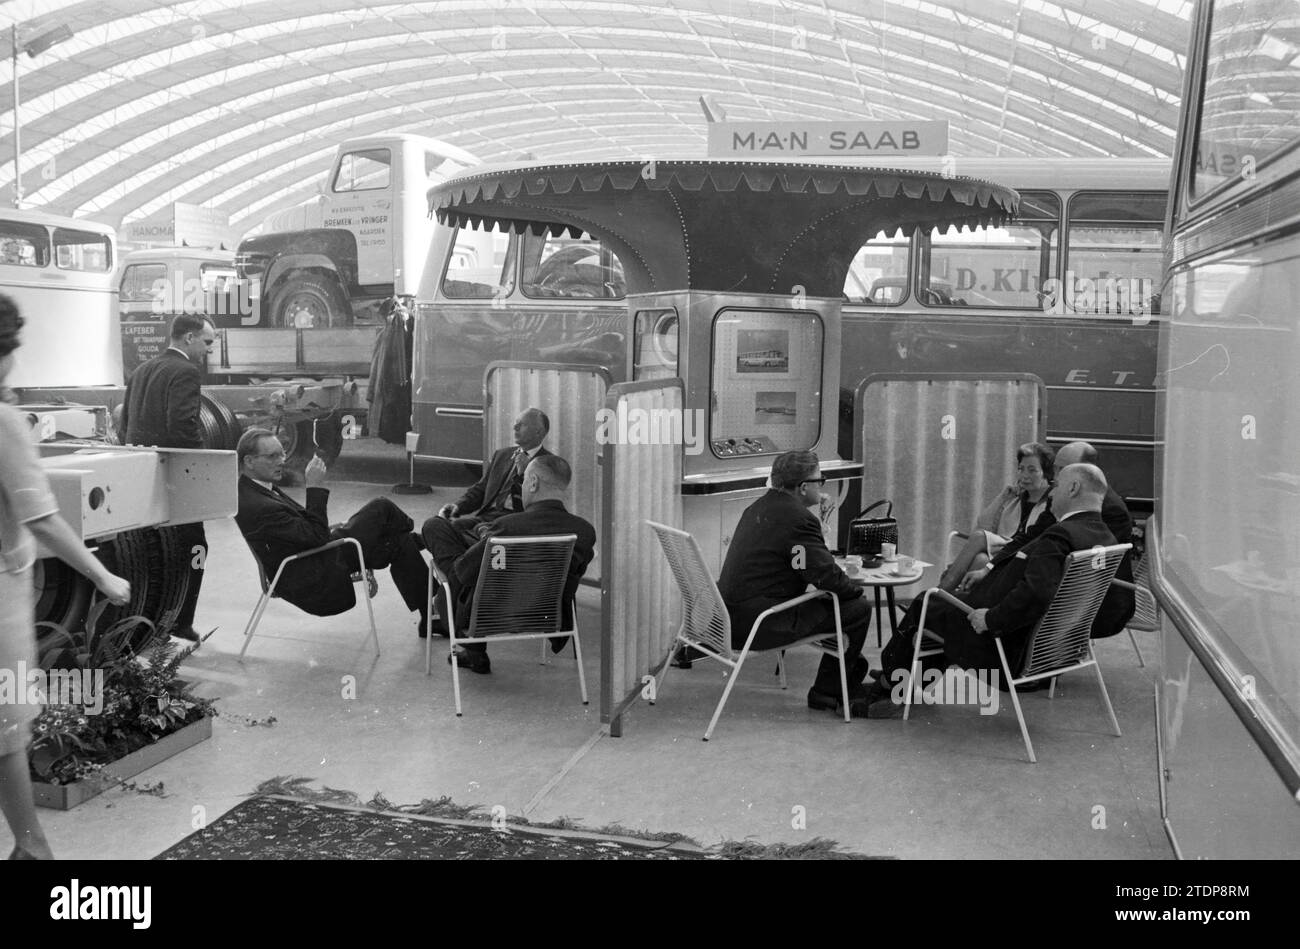 Commercial vehicles RAI, Meyson advertising agency, 22-02-1962, Whizgle News from the Past, Tailored for the Future. Explore historical narratives, Dutch The Netherlands agency image with a modern perspective, bridging the gap between yesterday's events and tomorrow's insights. A timeless journey shaping the stories that shape our future Stock Photo